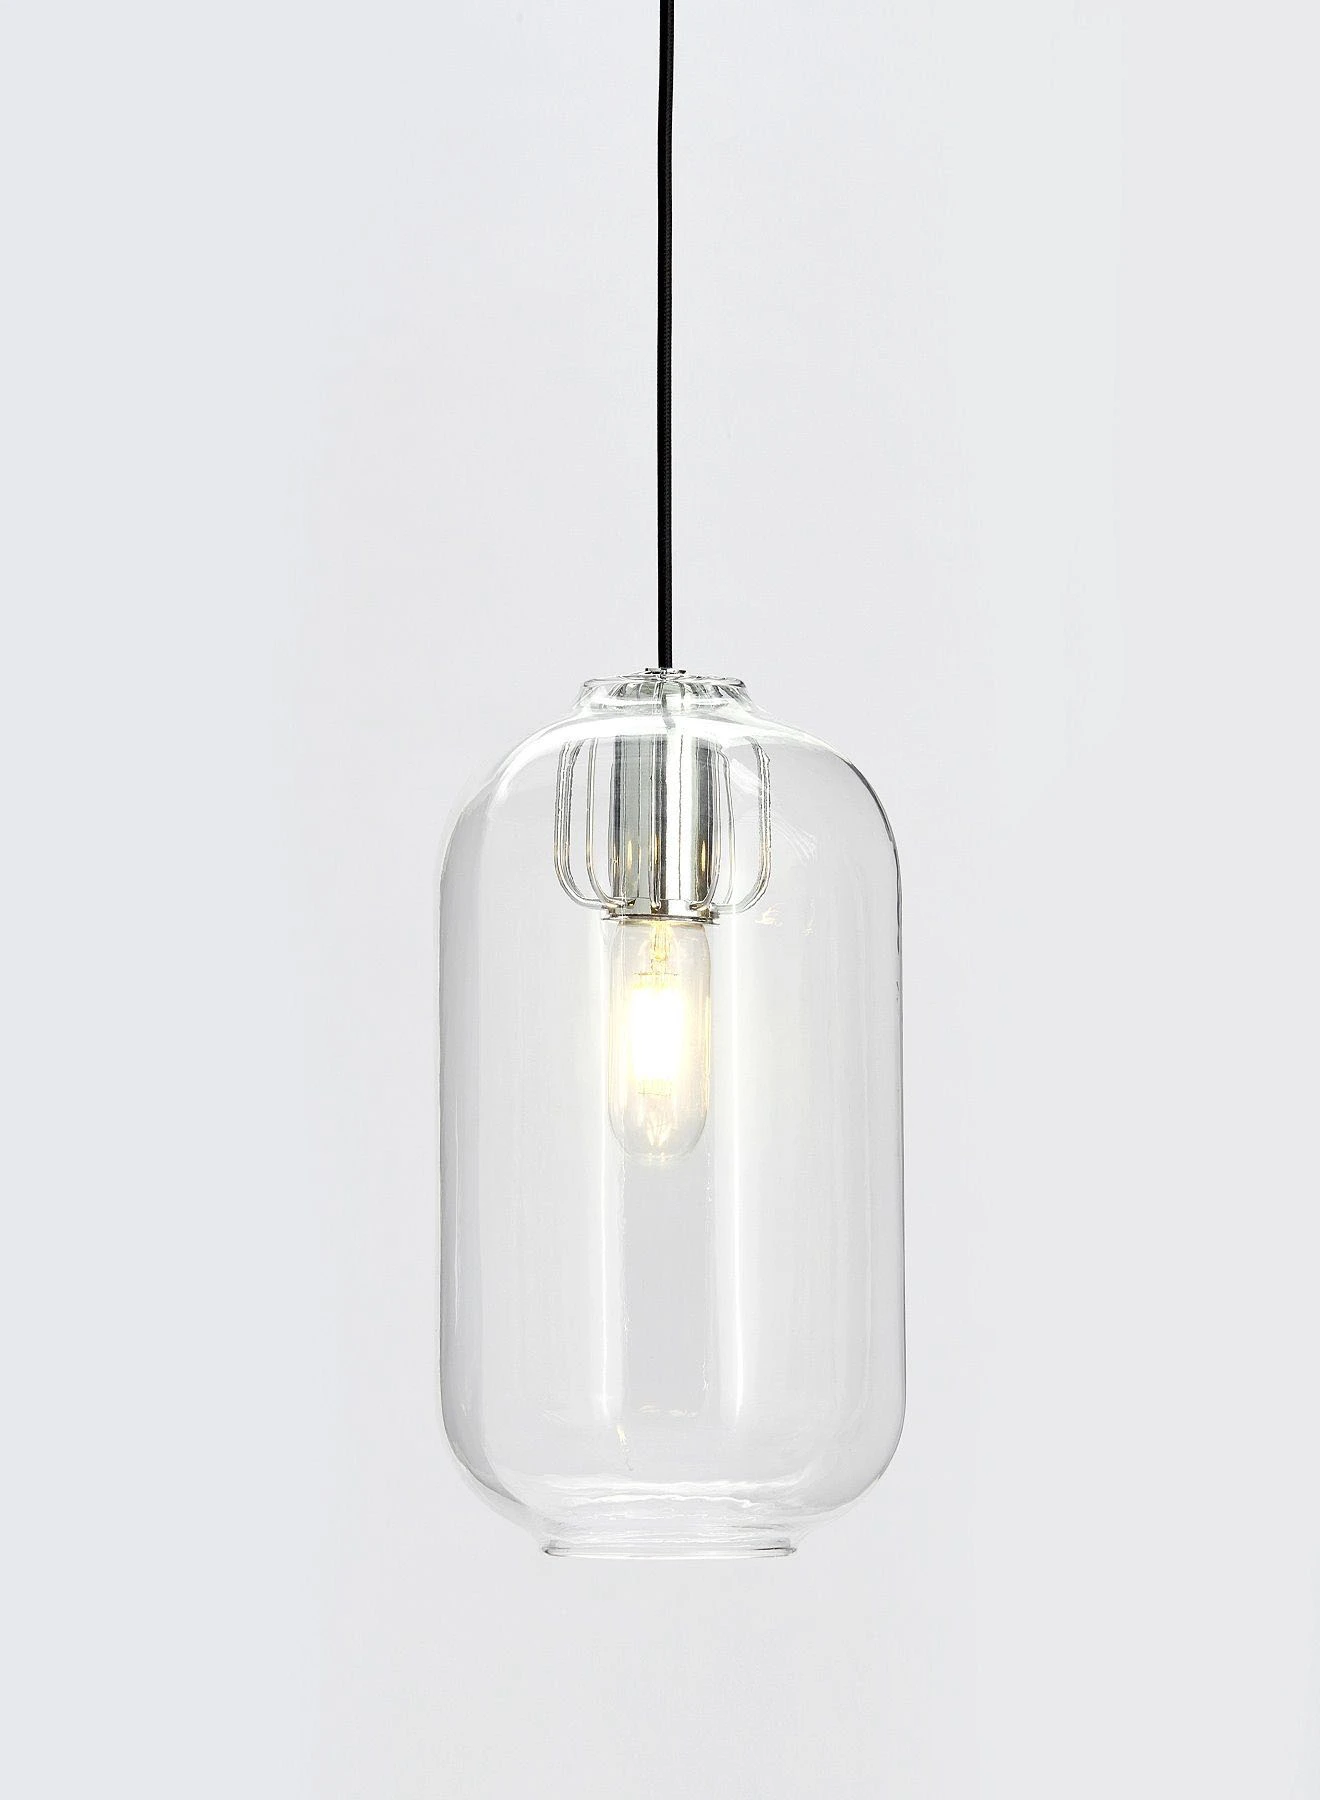 Switch Decorative Pendant Lamp Unique Luxury Quality Material for the Perfect Stylish Home PL020510 Clear 19.4cm